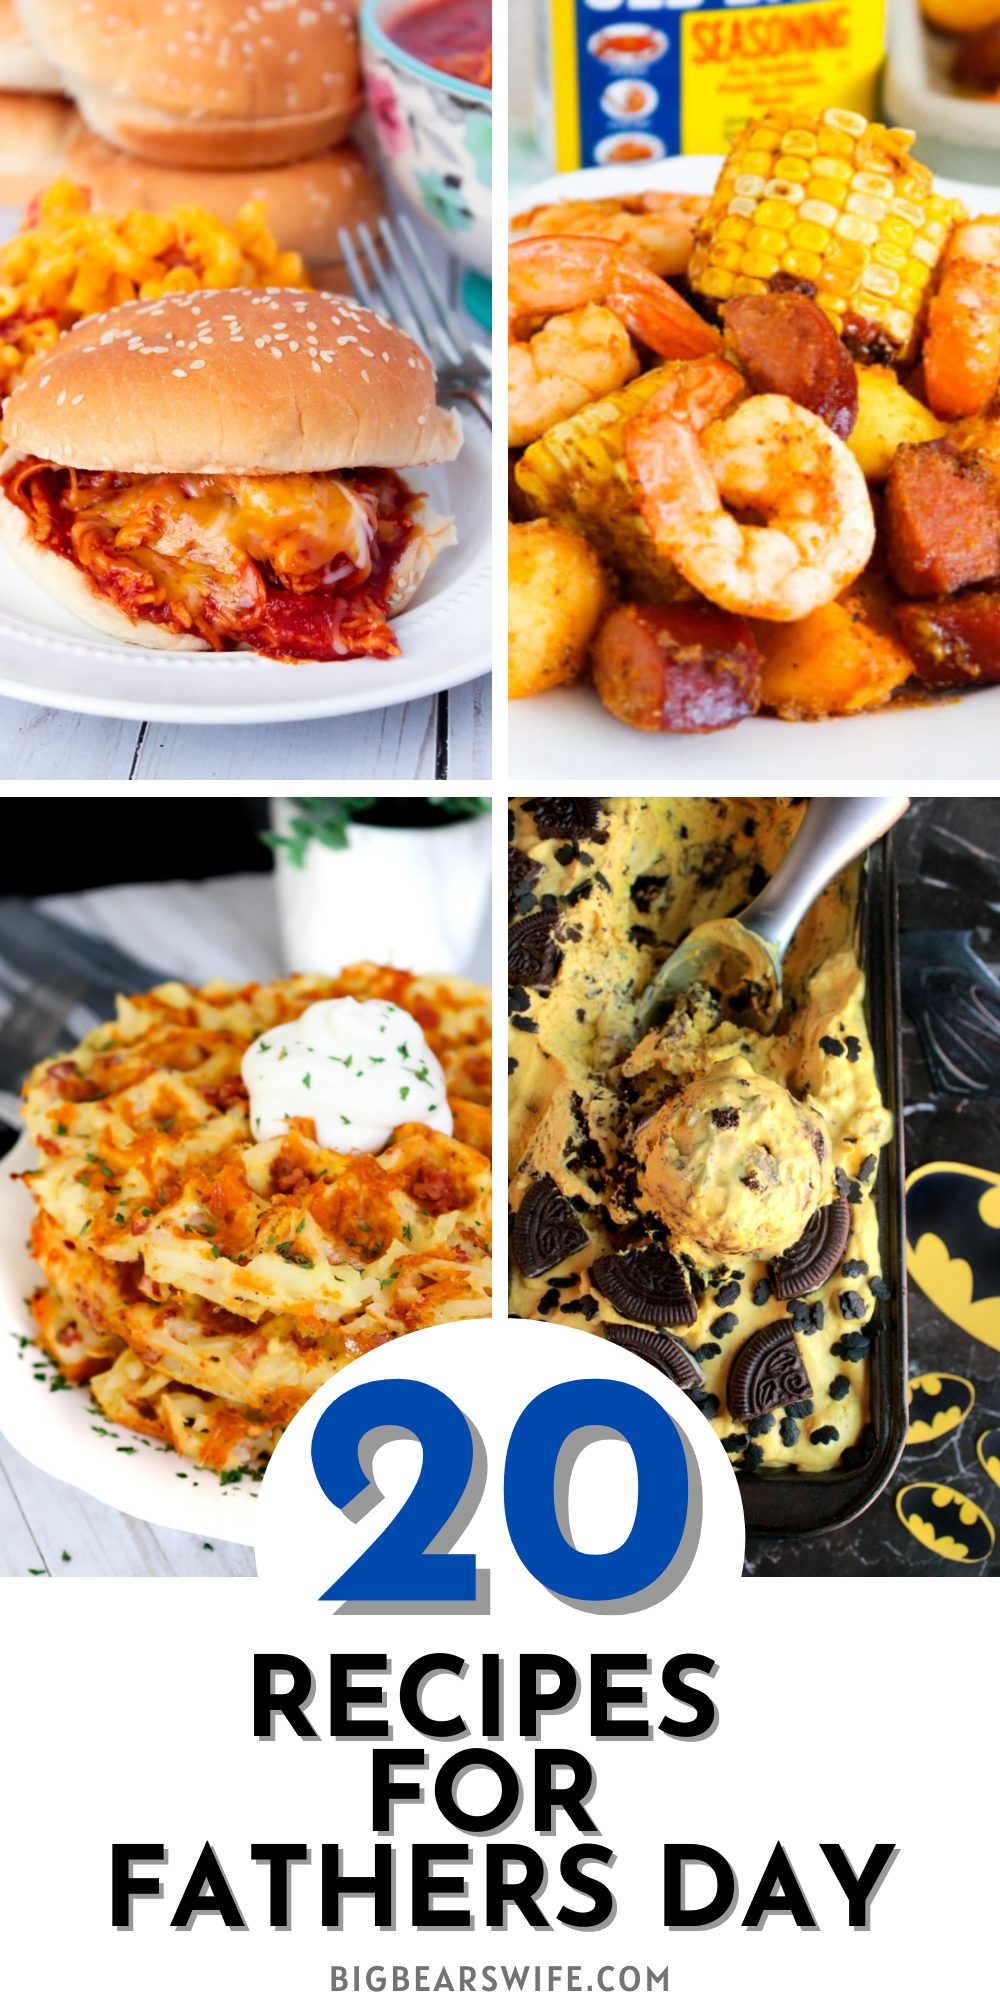 Father's Day 2021 is Sunday, June 20, 2021! I've gathered up some great recipes that are perfect for Father's Day! From Breakfast, to lunch to dinner and dessert, you're sure to find something delicious in this list that dad would love with these awesome Fathers Day Recipes! via @bigbearswife